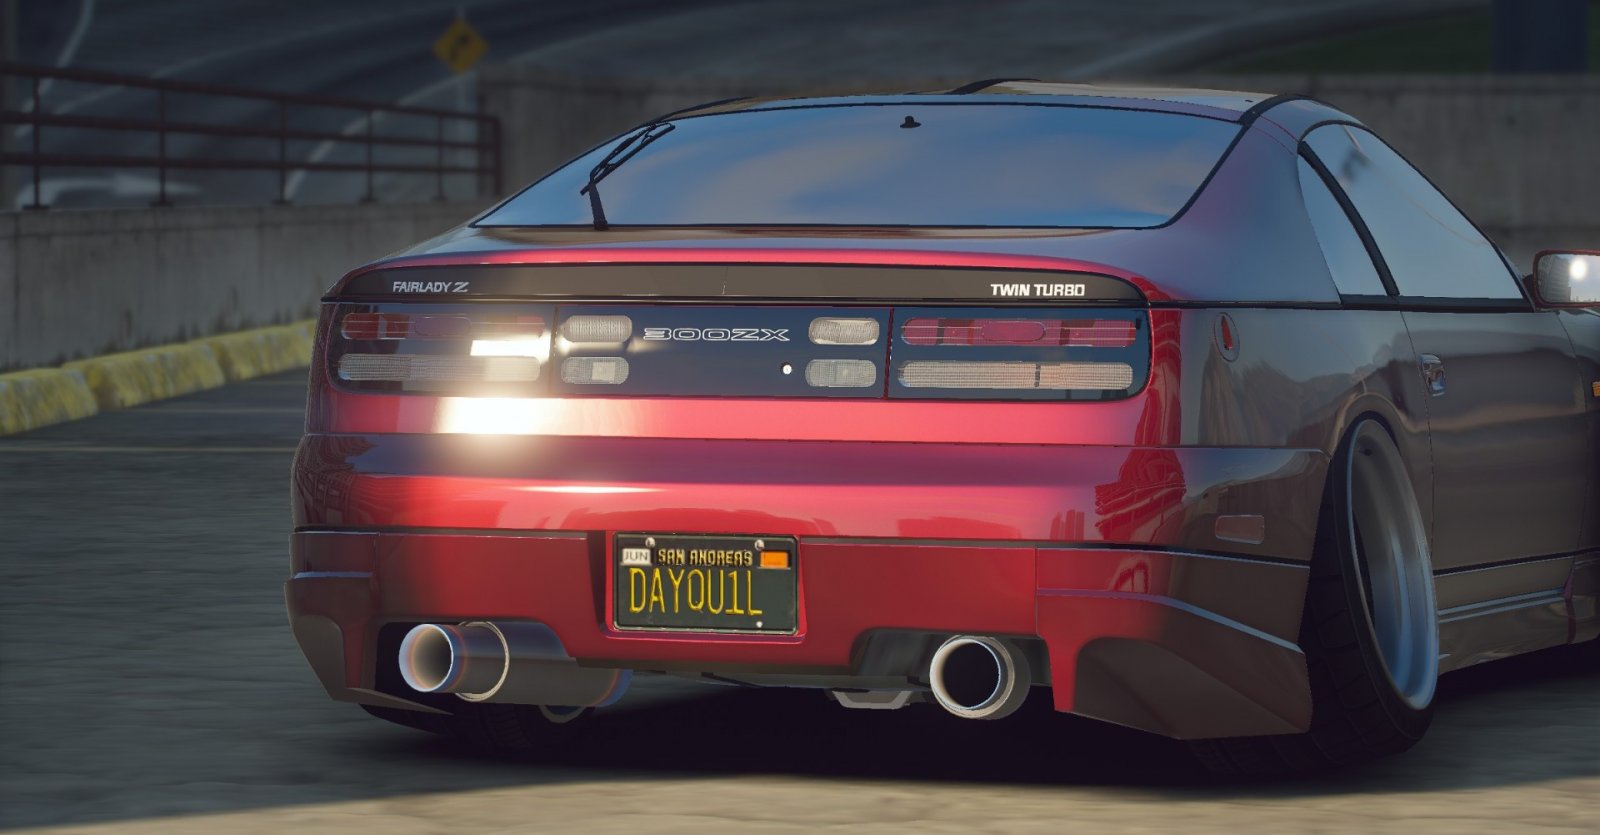 Stanced 300ZX Photo Shoot (6/6)